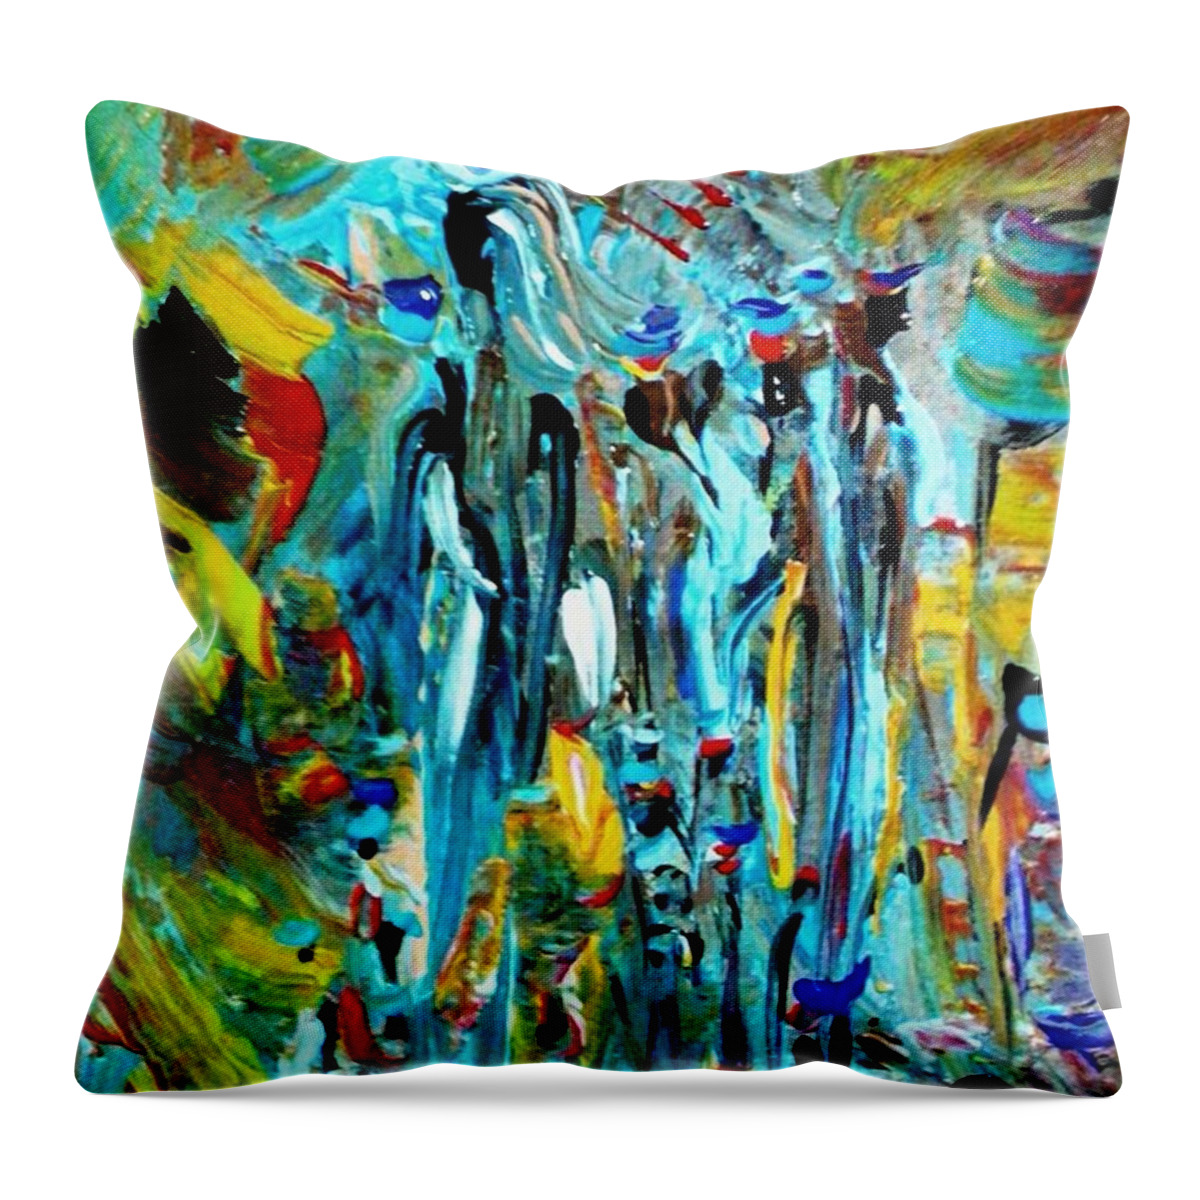 Tribal Throw Pillow featuring the painting African Tribe Festivals by Kelly M Turner